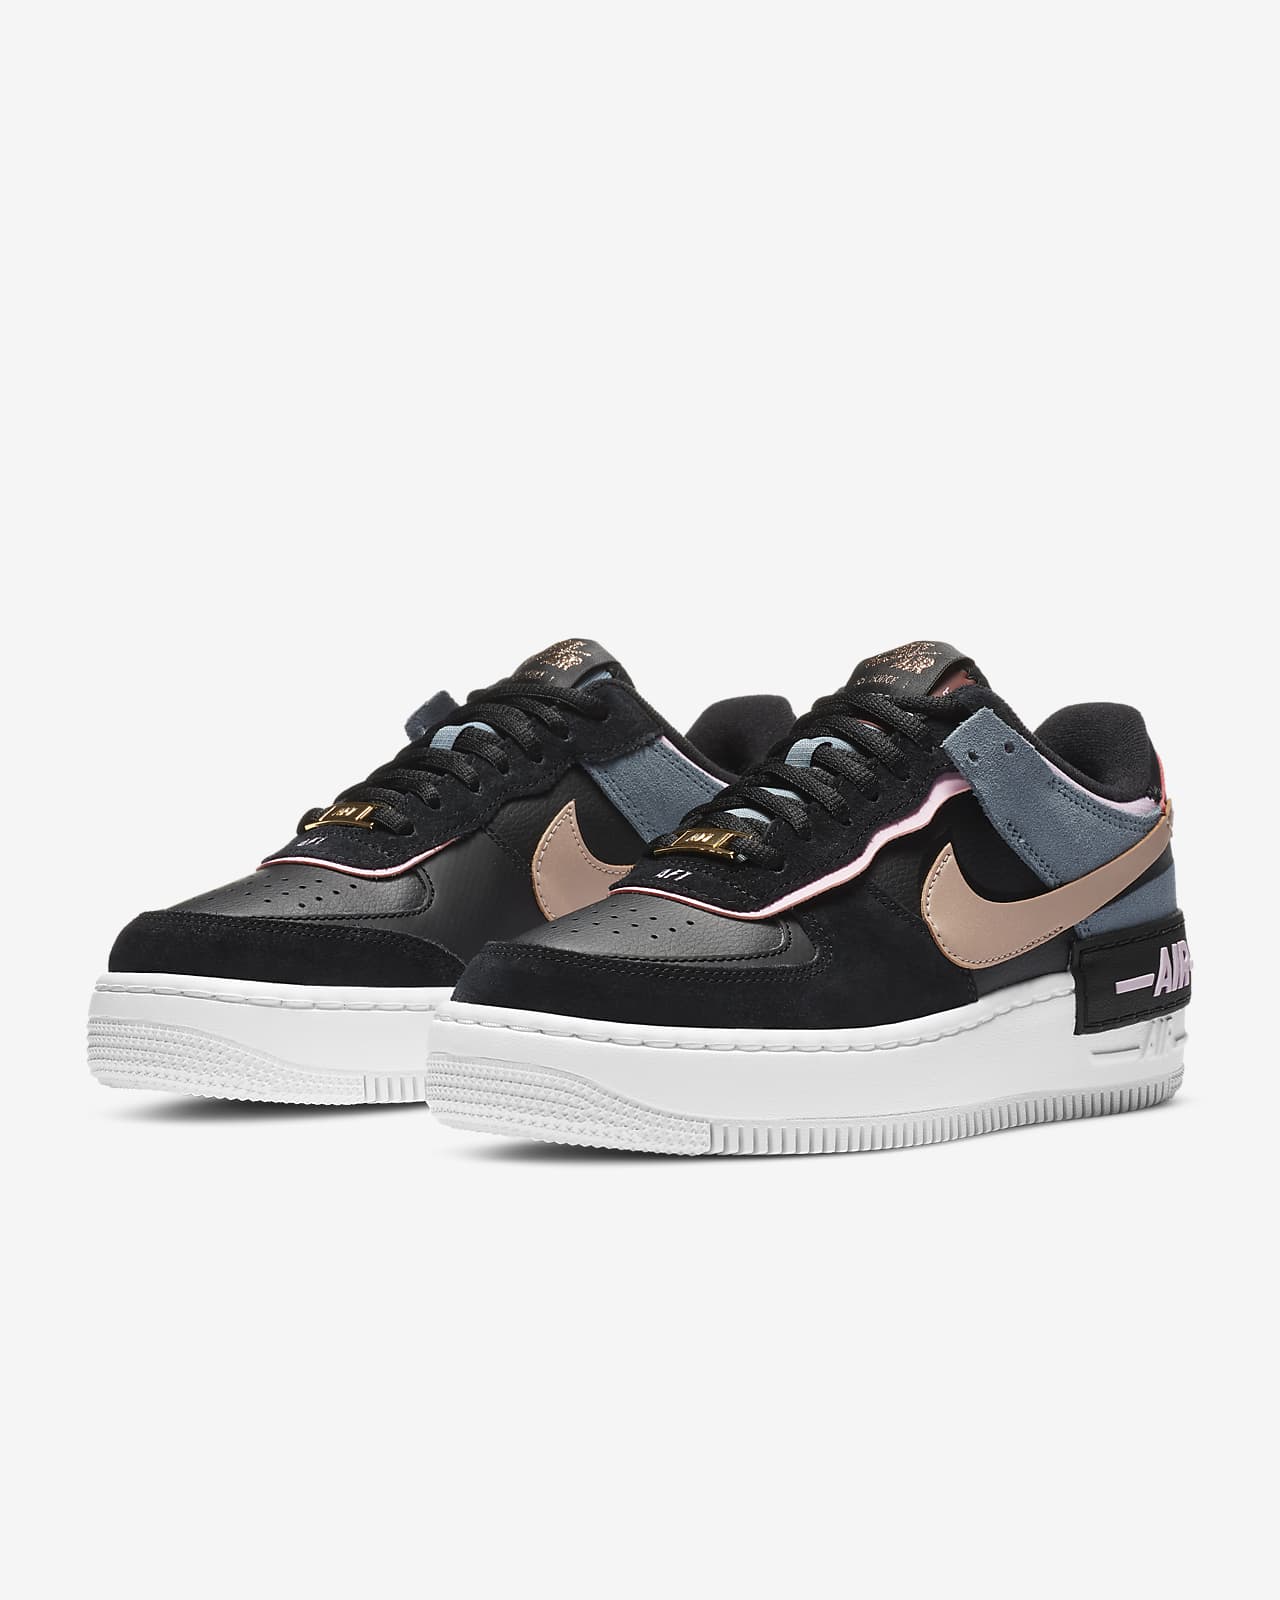 nike air force 1 shadow women's pink